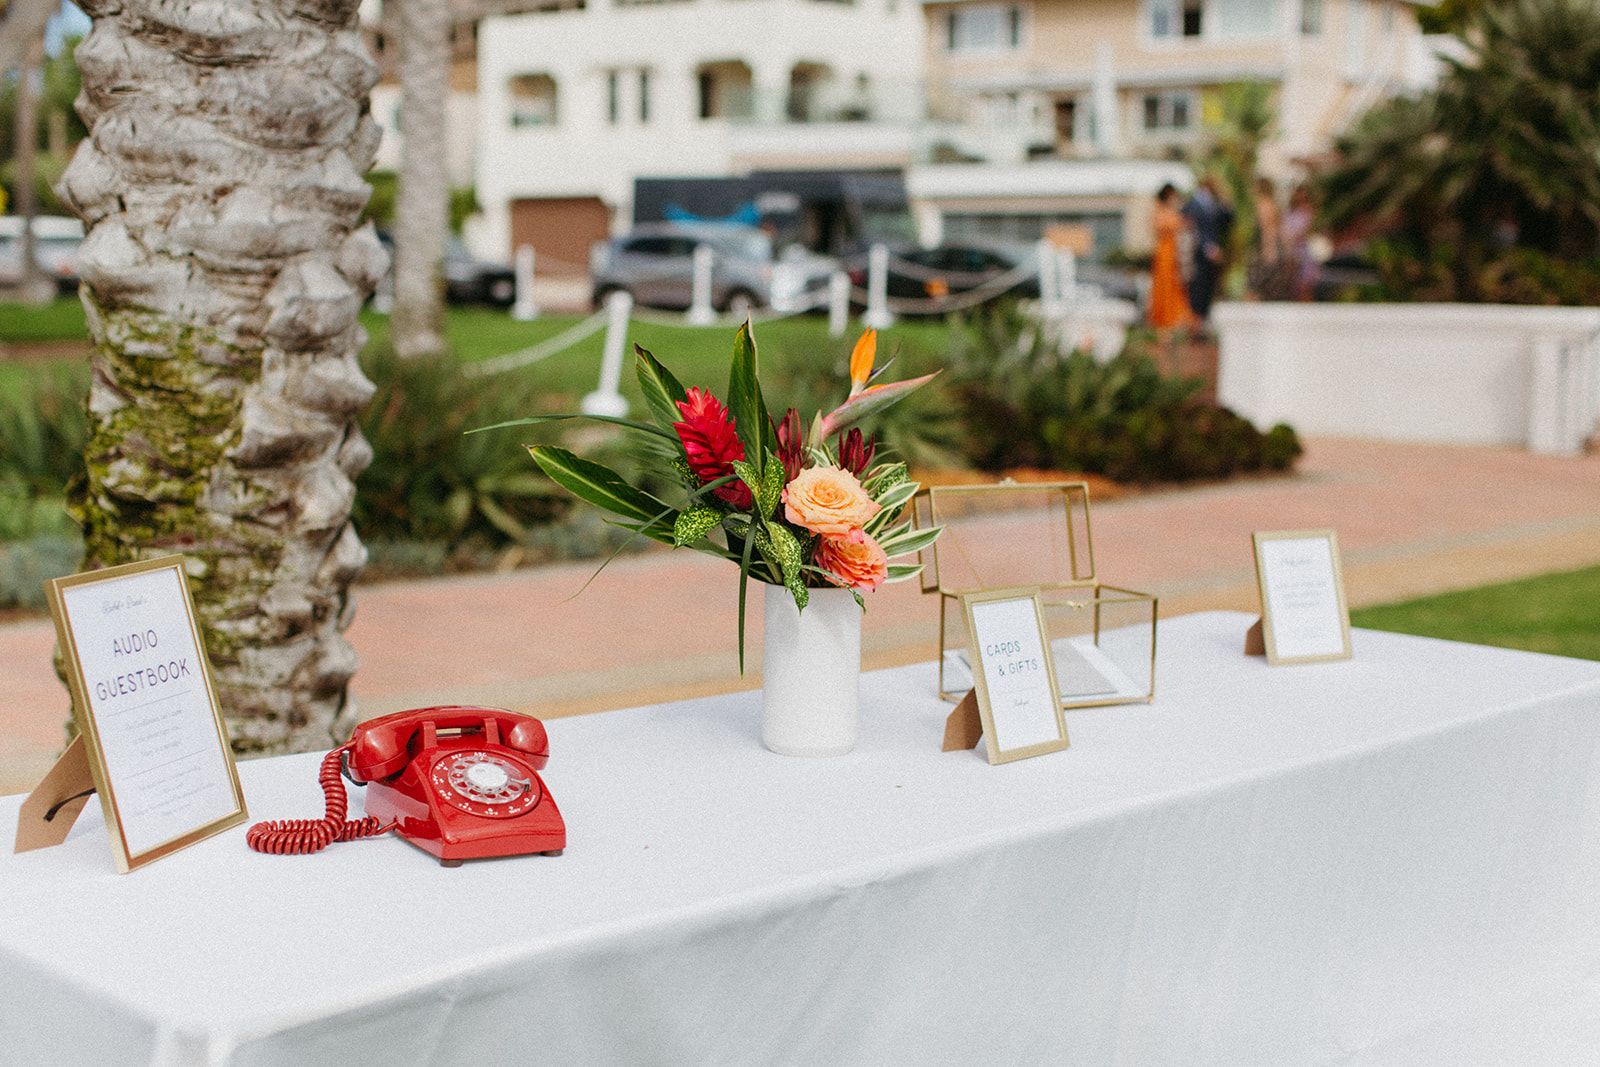 wedding welcome table with tropical flower arrangement, red vintage telephone as an audio guest book and gold framed glass card box